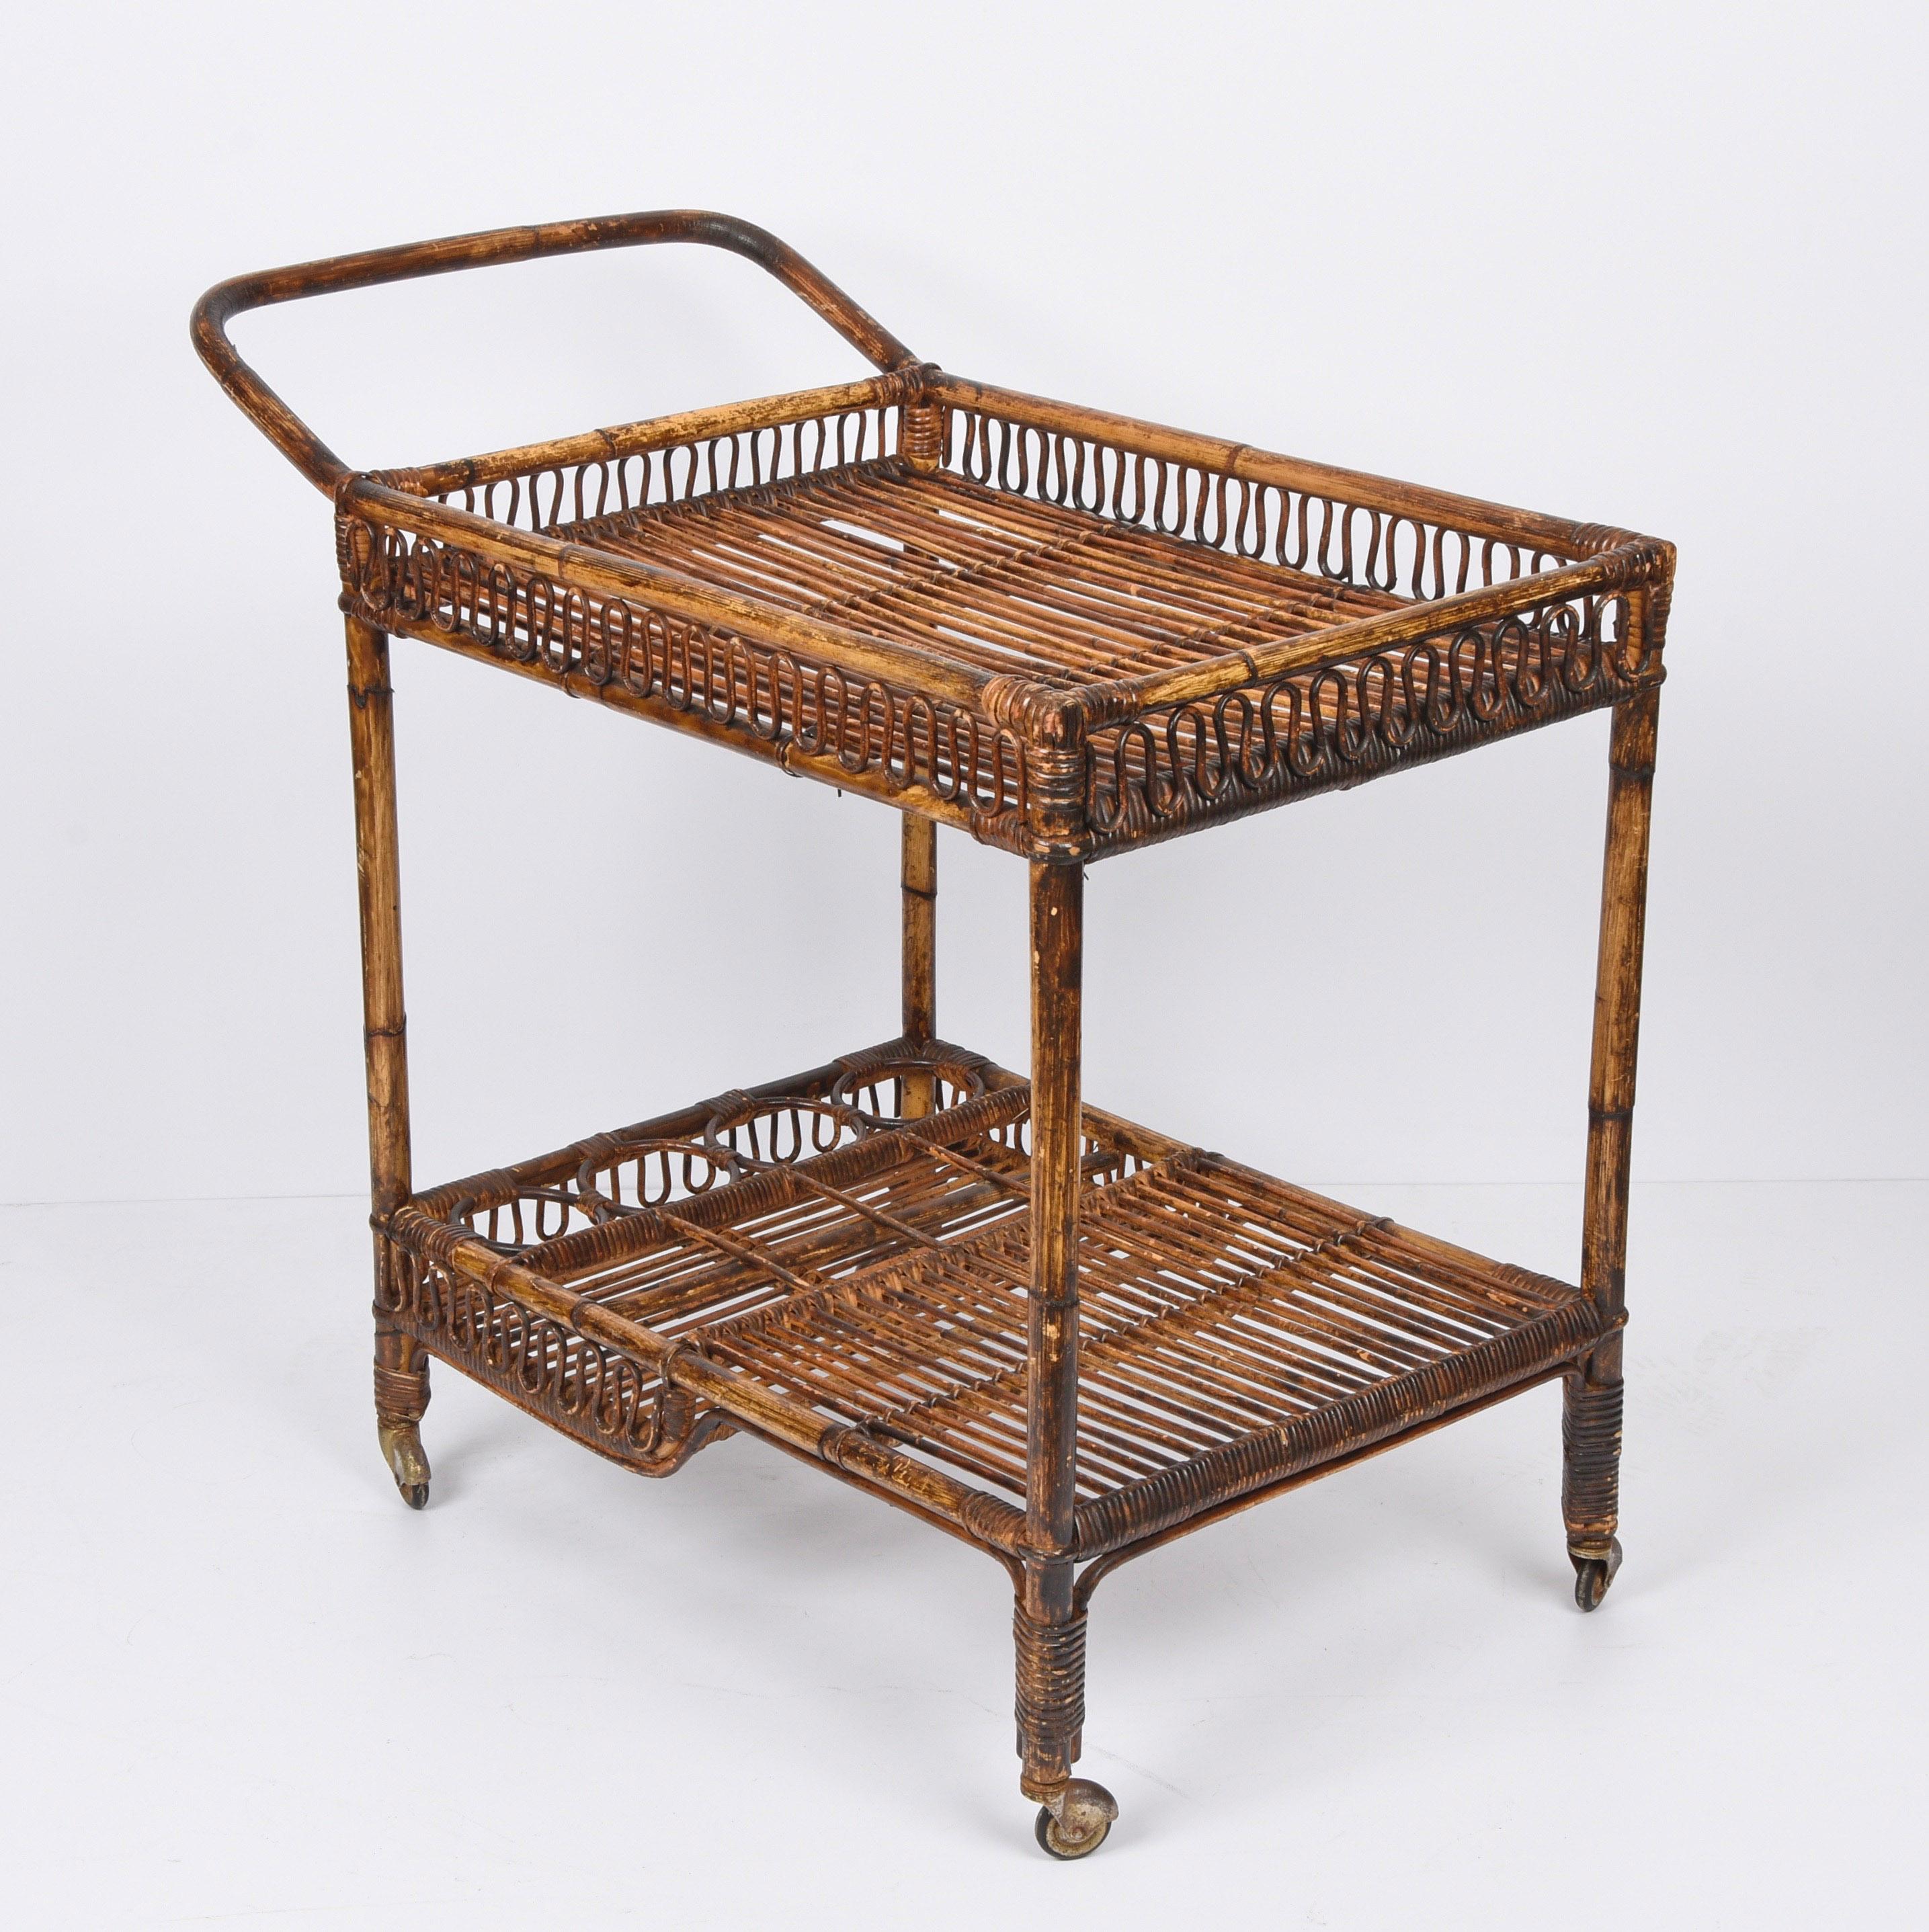 Mid-Century Modern French Riviera Rectangular Bamboo and Rattan Trolley Bar Cart, France, 1960s